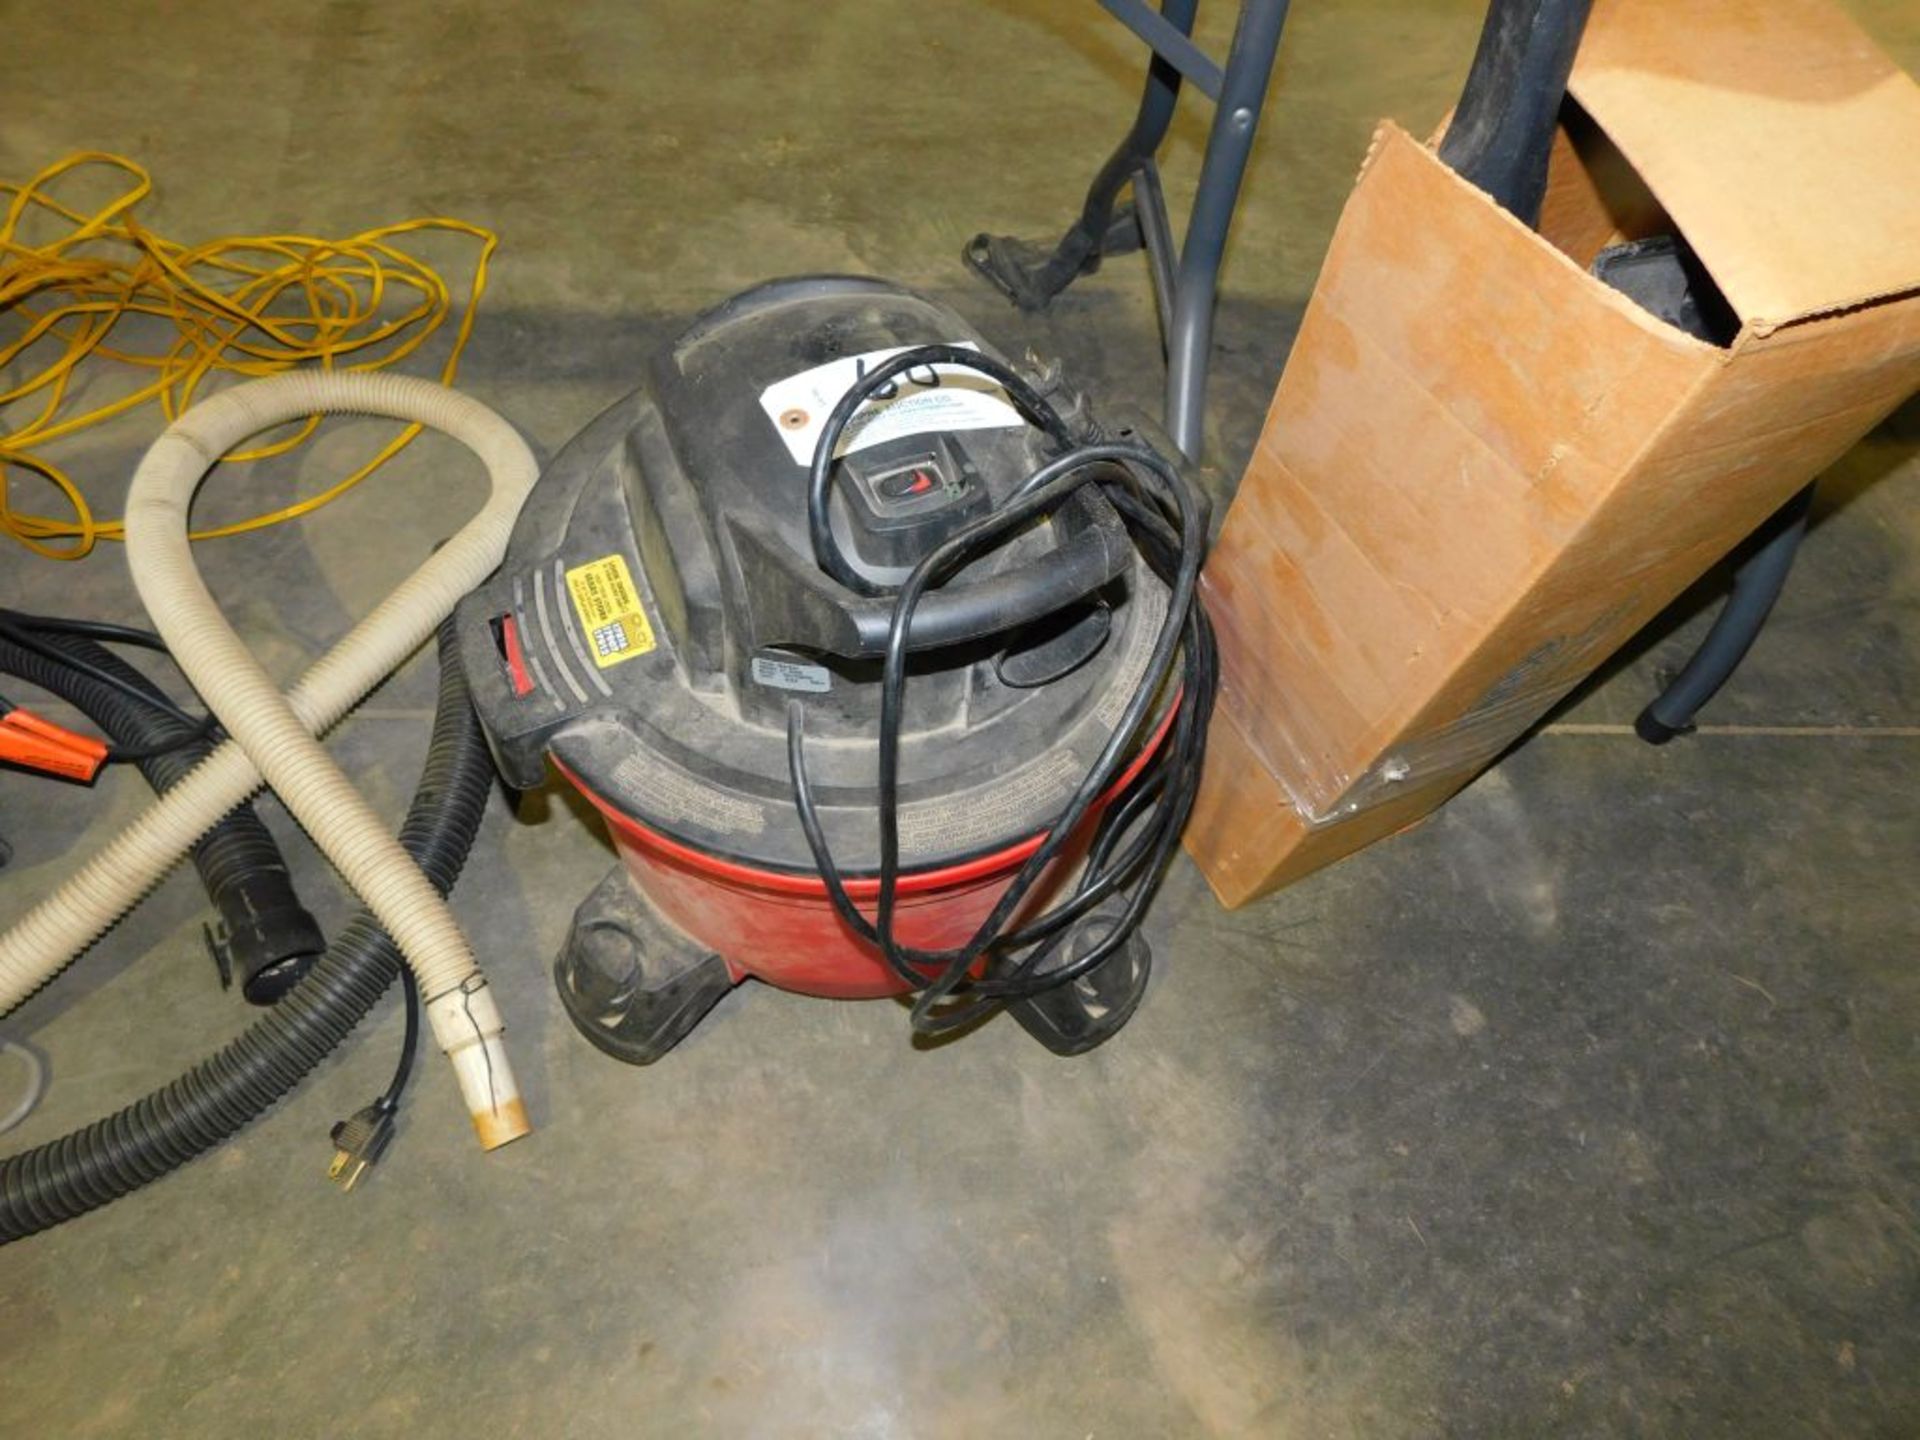 Shop vac. (Located at and to be picked up at: 2862 Wagner Rd., Waterloo, IA)